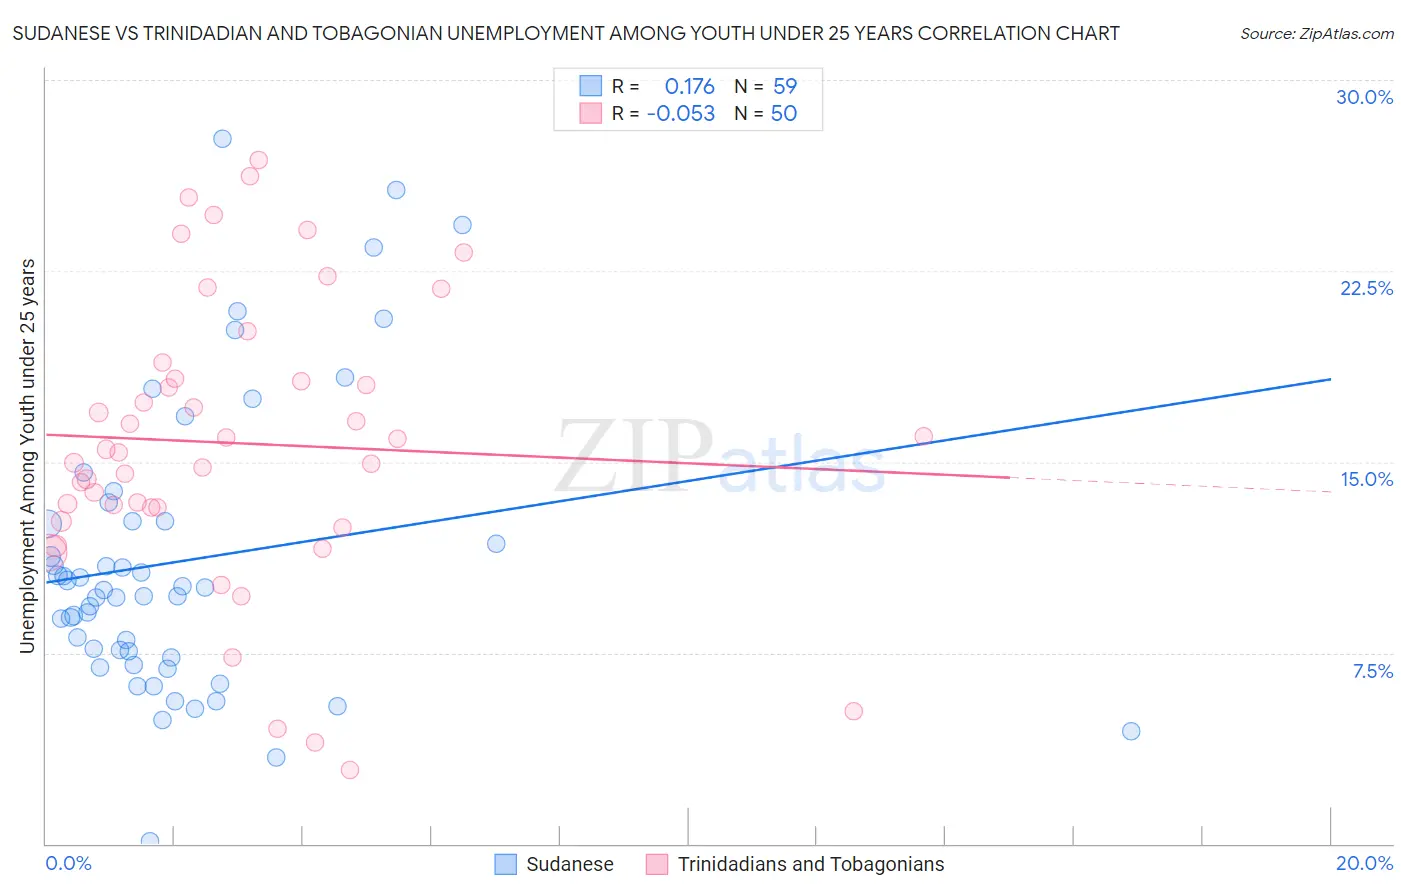 Sudanese vs Trinidadian and Tobagonian Unemployment Among Youth under 25 years